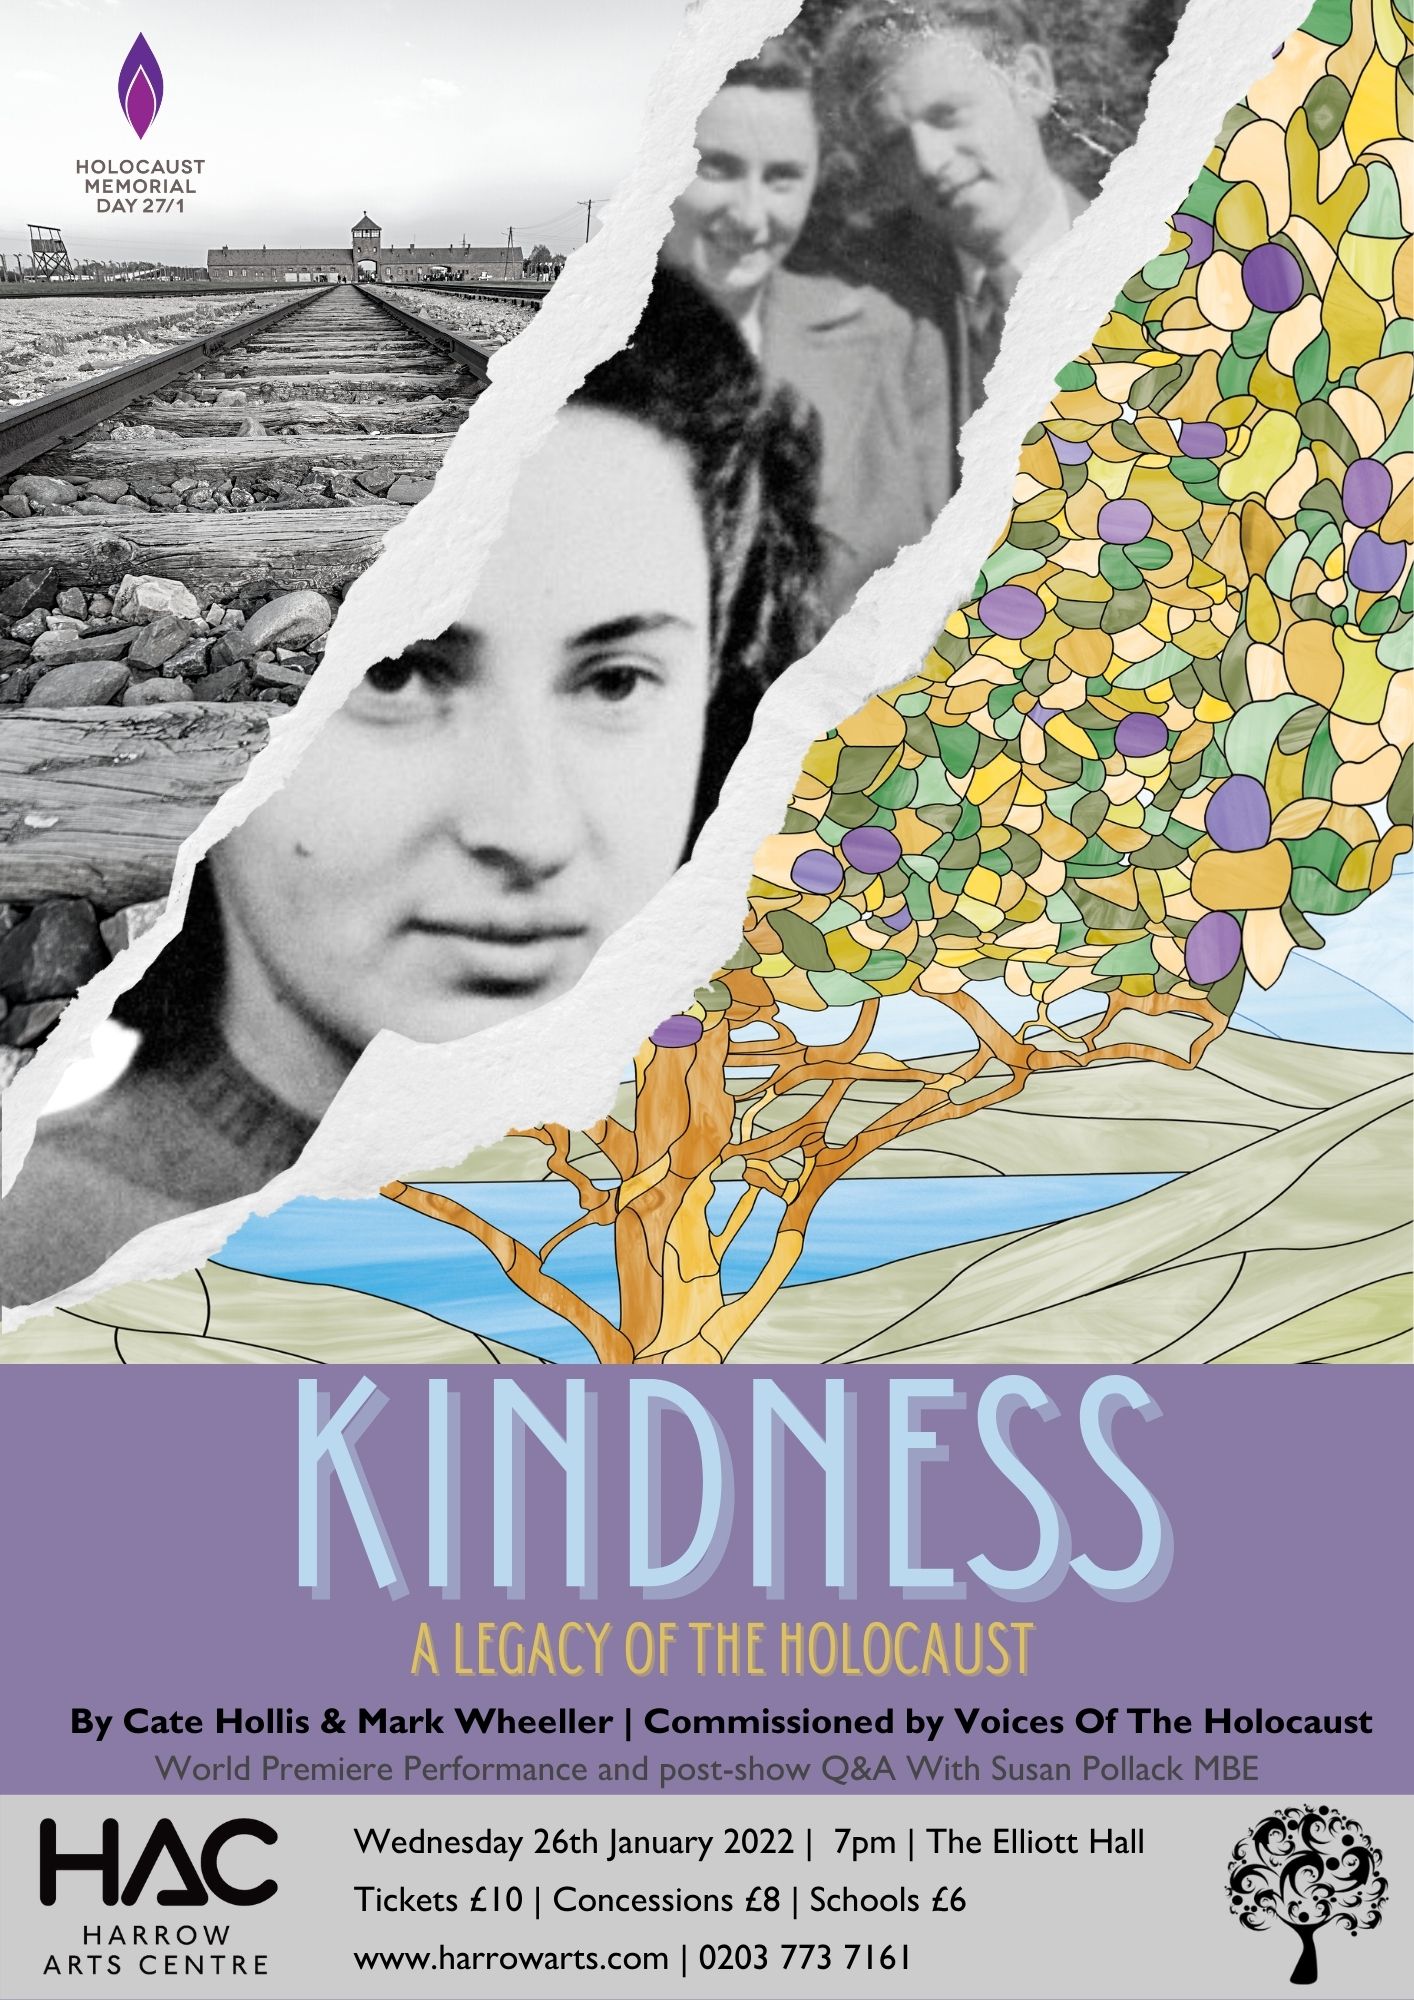 Kindness: A Legacy of the Holocaust - international premiere